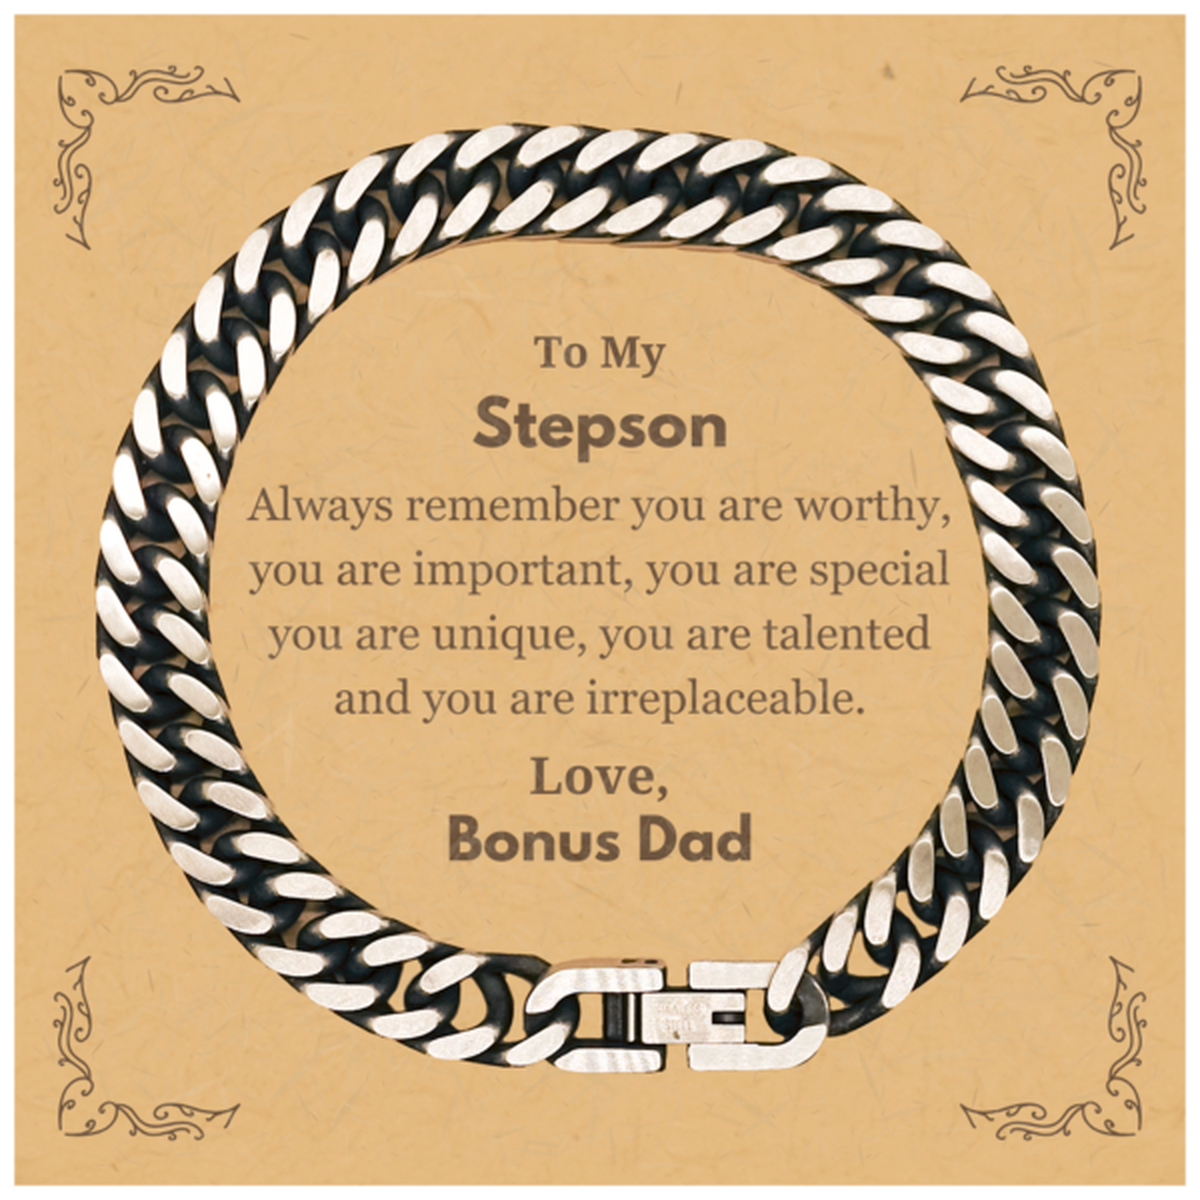 Stepson Birthday Gifts from Bonus Dad, Inspirational Cuban Link Chain Bracelet for Stepson Christmas Graduation Gifts for Stepson Always remember you are worthy, you are important. Love, Bonus Dad